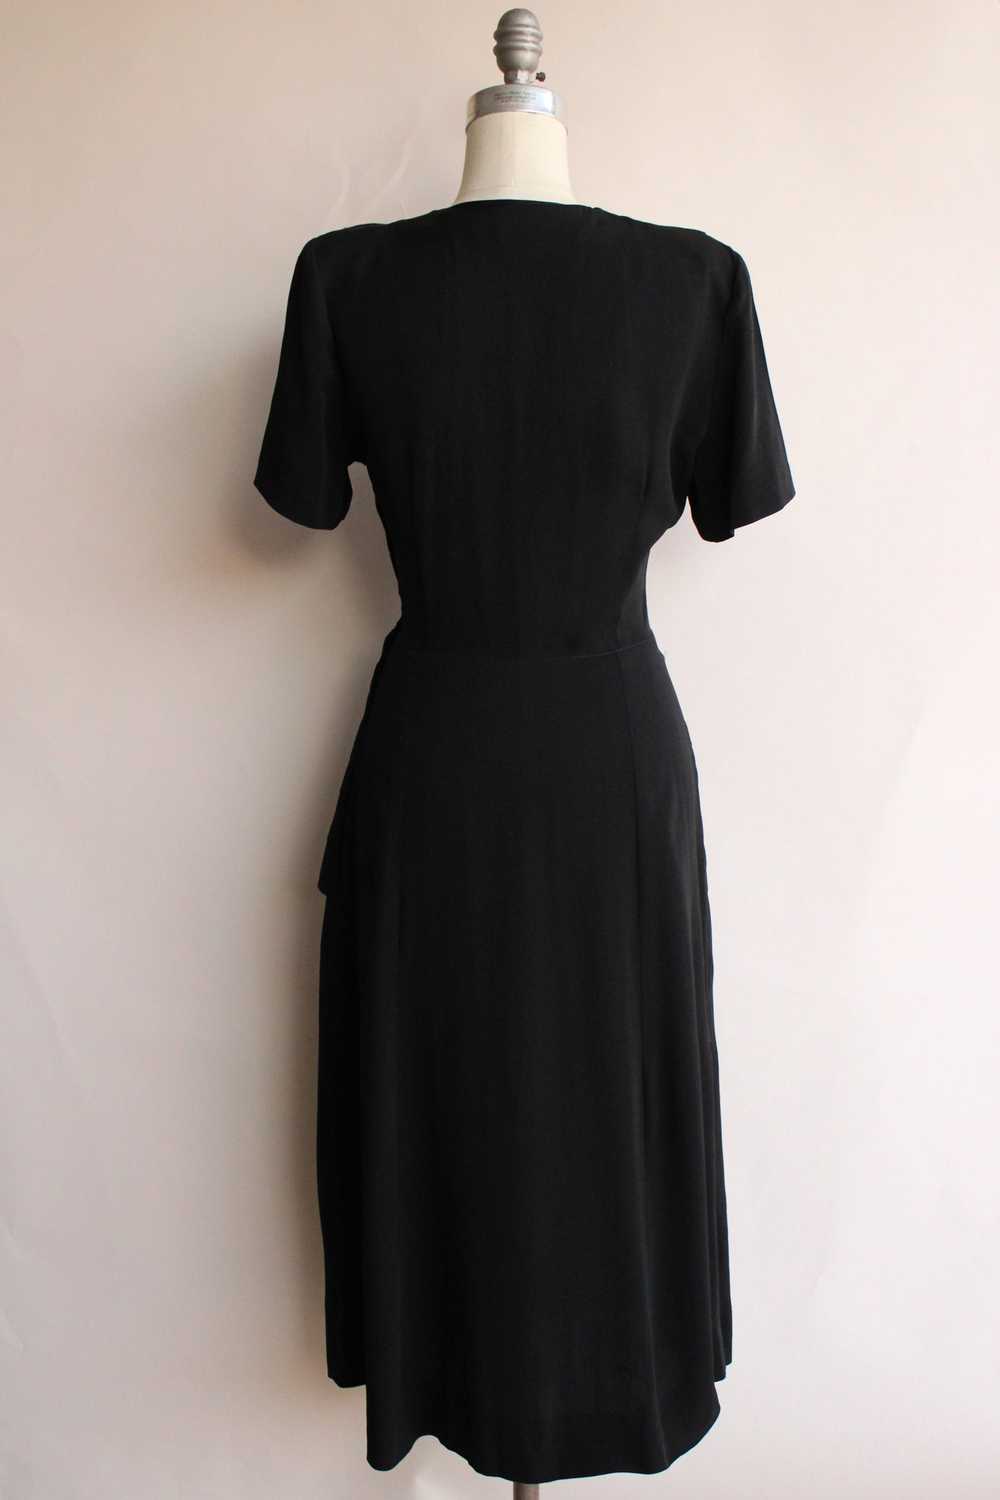 Vintage 1940s Black Rayon Dress With Square Shawl… - image 8